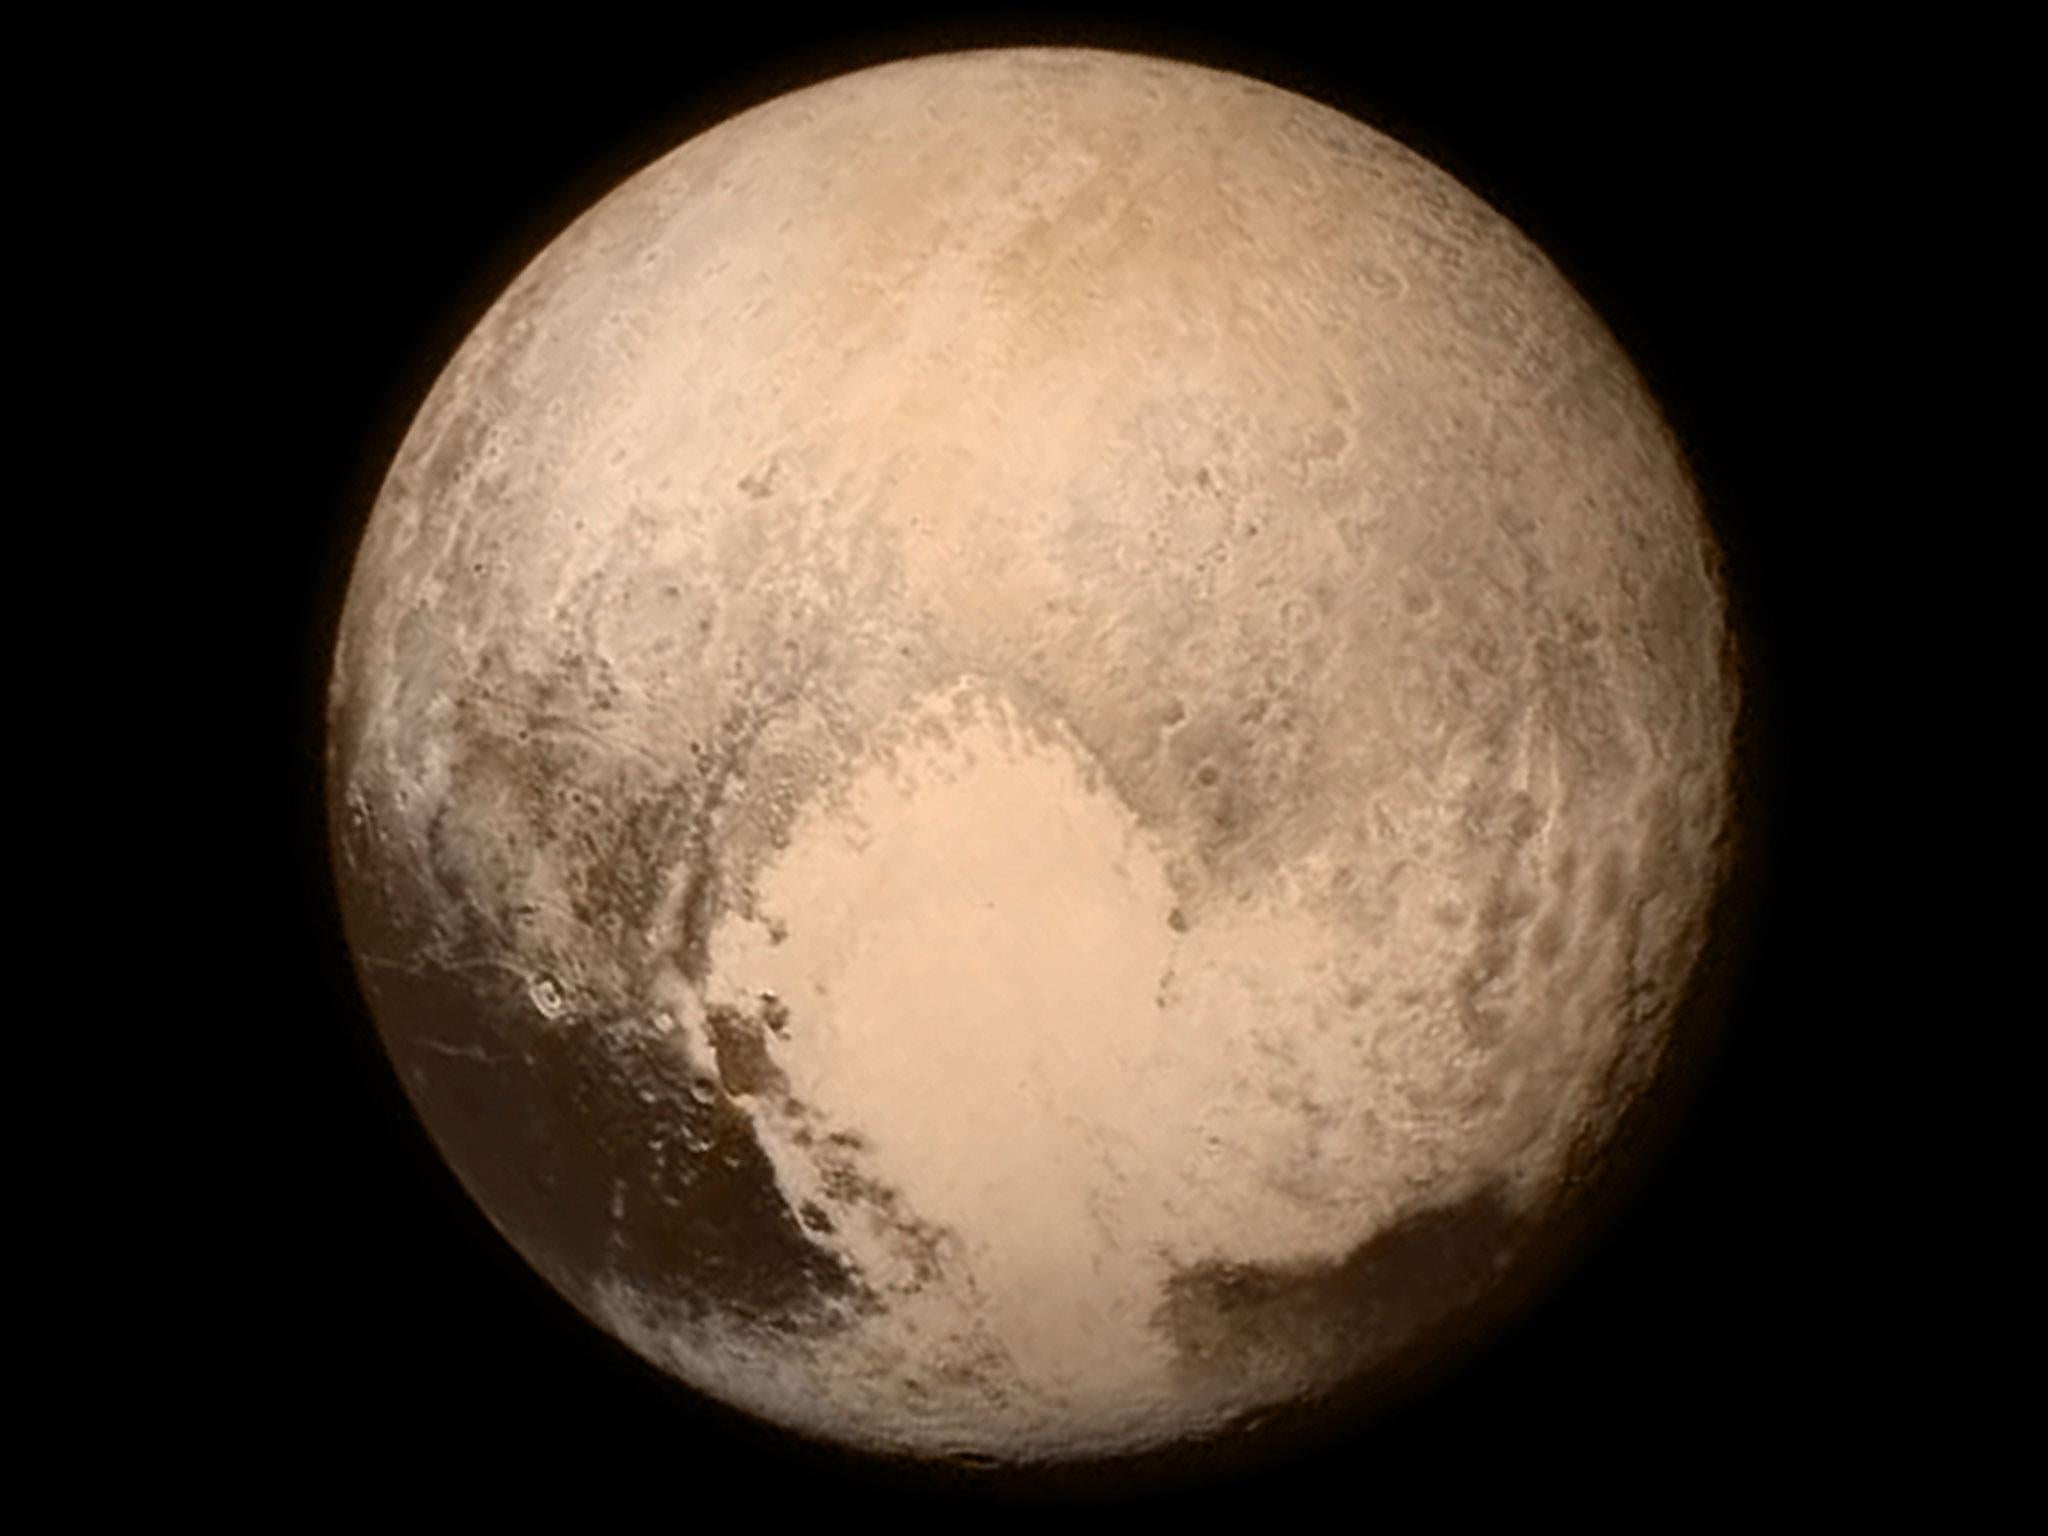 Nasa's New Horizons spacecraft captured this high-resolution enhanced color view of Pluto on 14 July, 2015